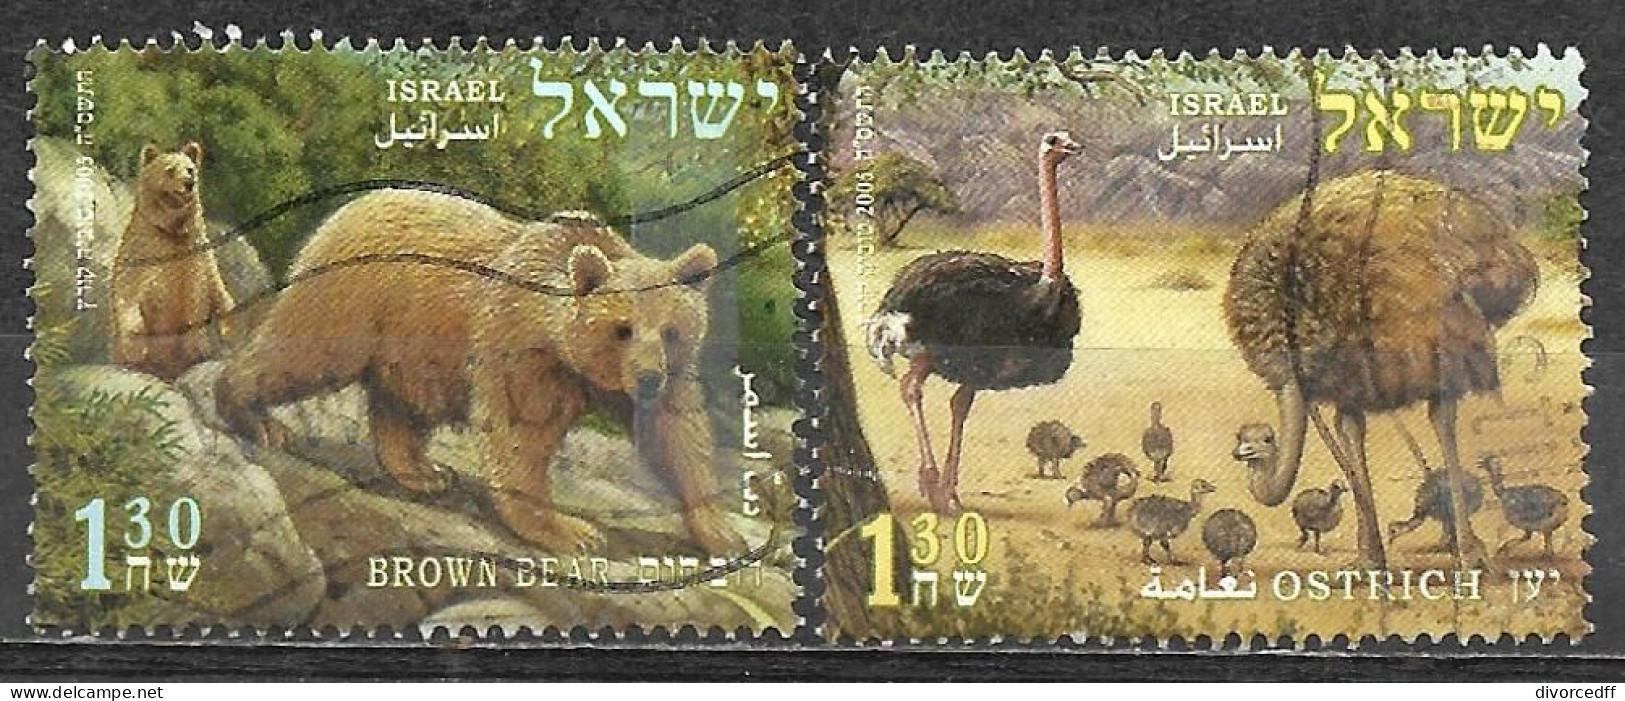 Israel 2005 Used Stamps Animals From The Bible Bear Ostrich [INLT19] - Gebraucht (ohne Tabs)